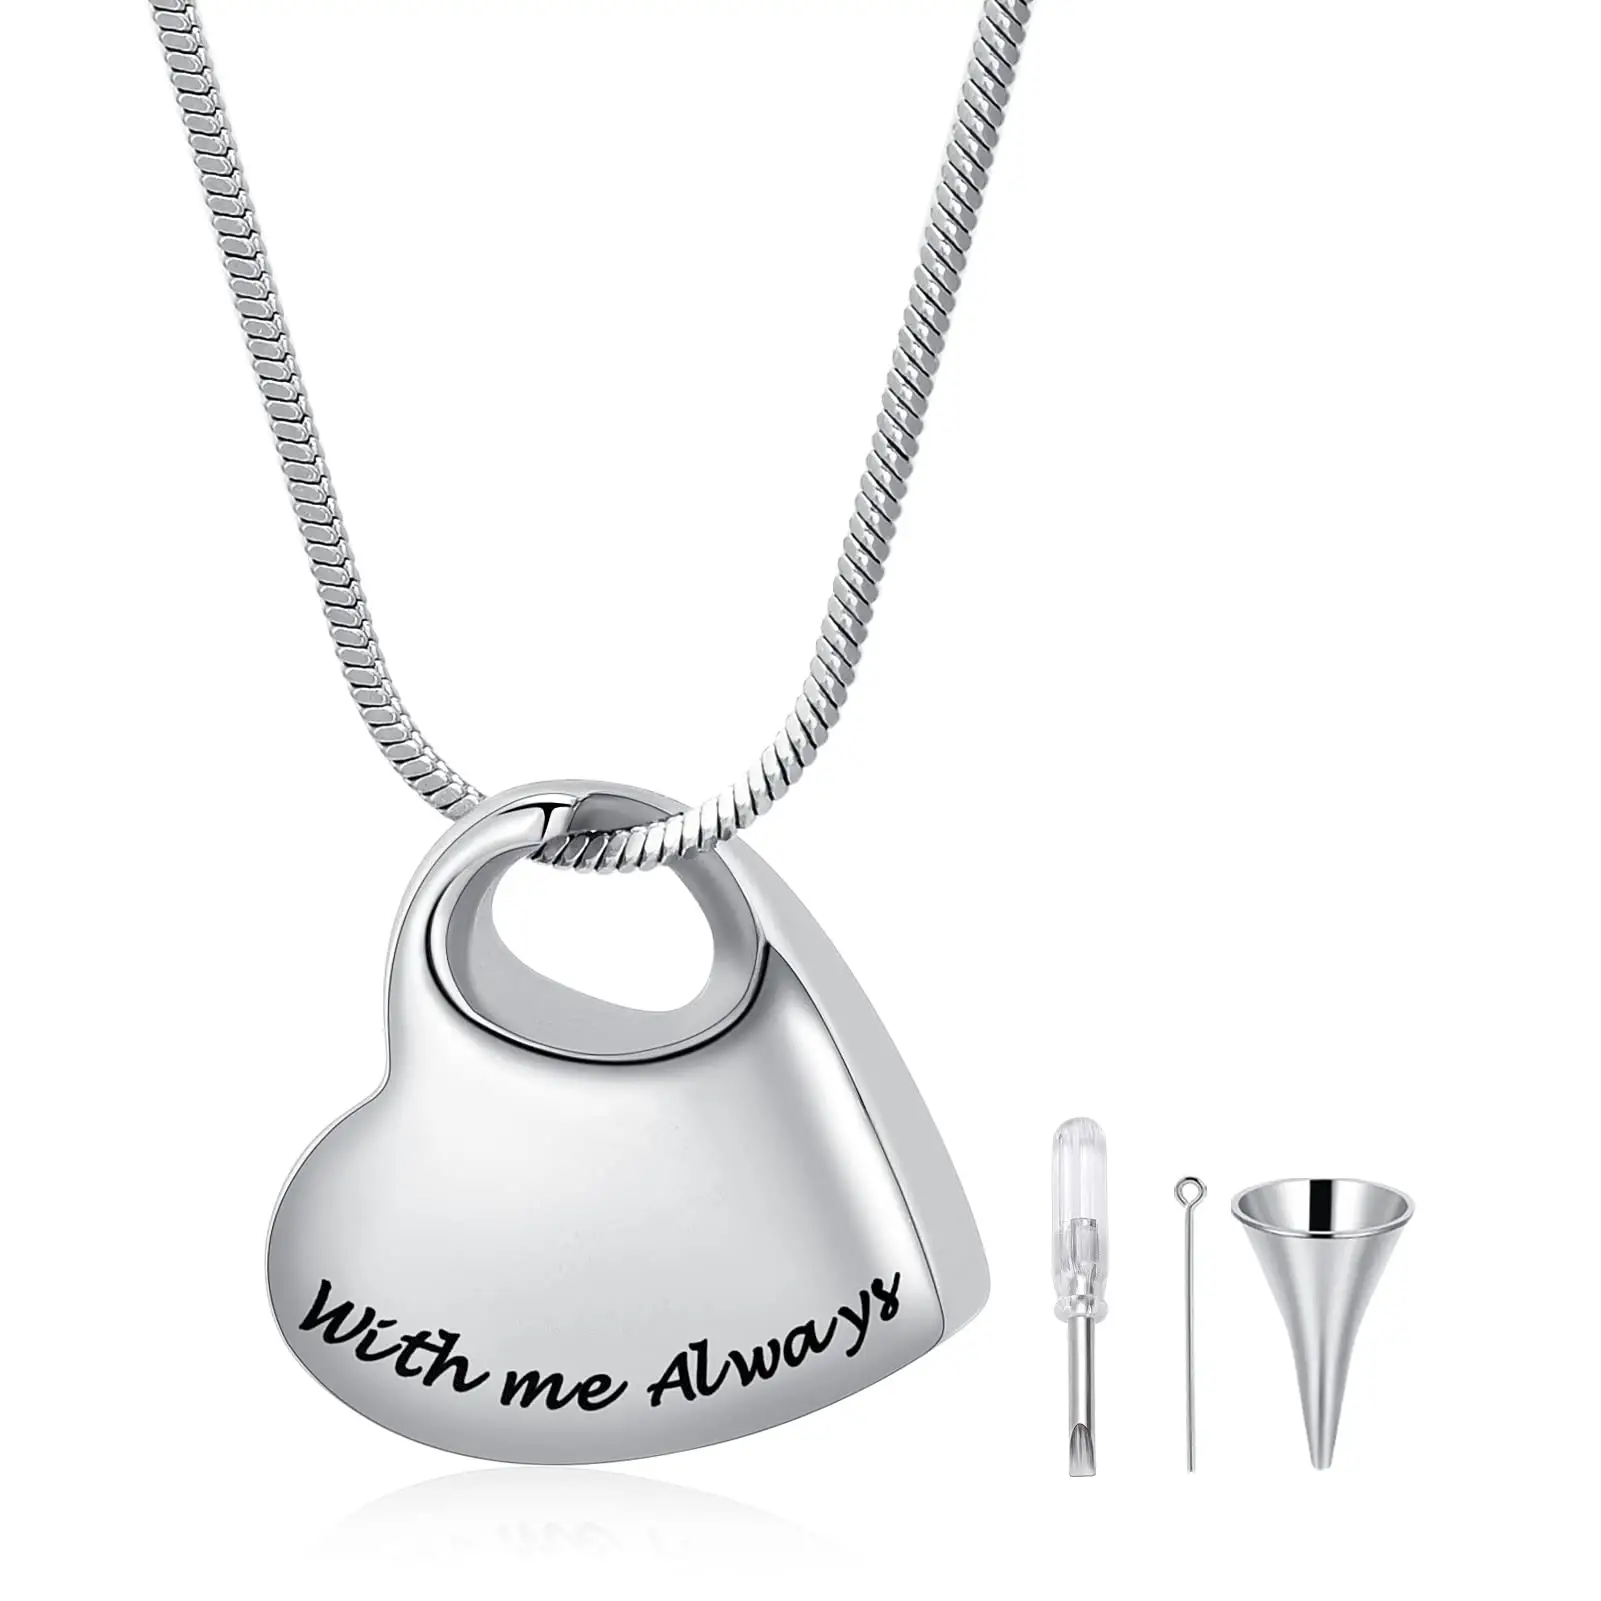 Cremation Urn Necklace for Ashes Jewelry With Me Always Carved Stainless Steel Keepsake Waterproof Memorial Pendant for Adults